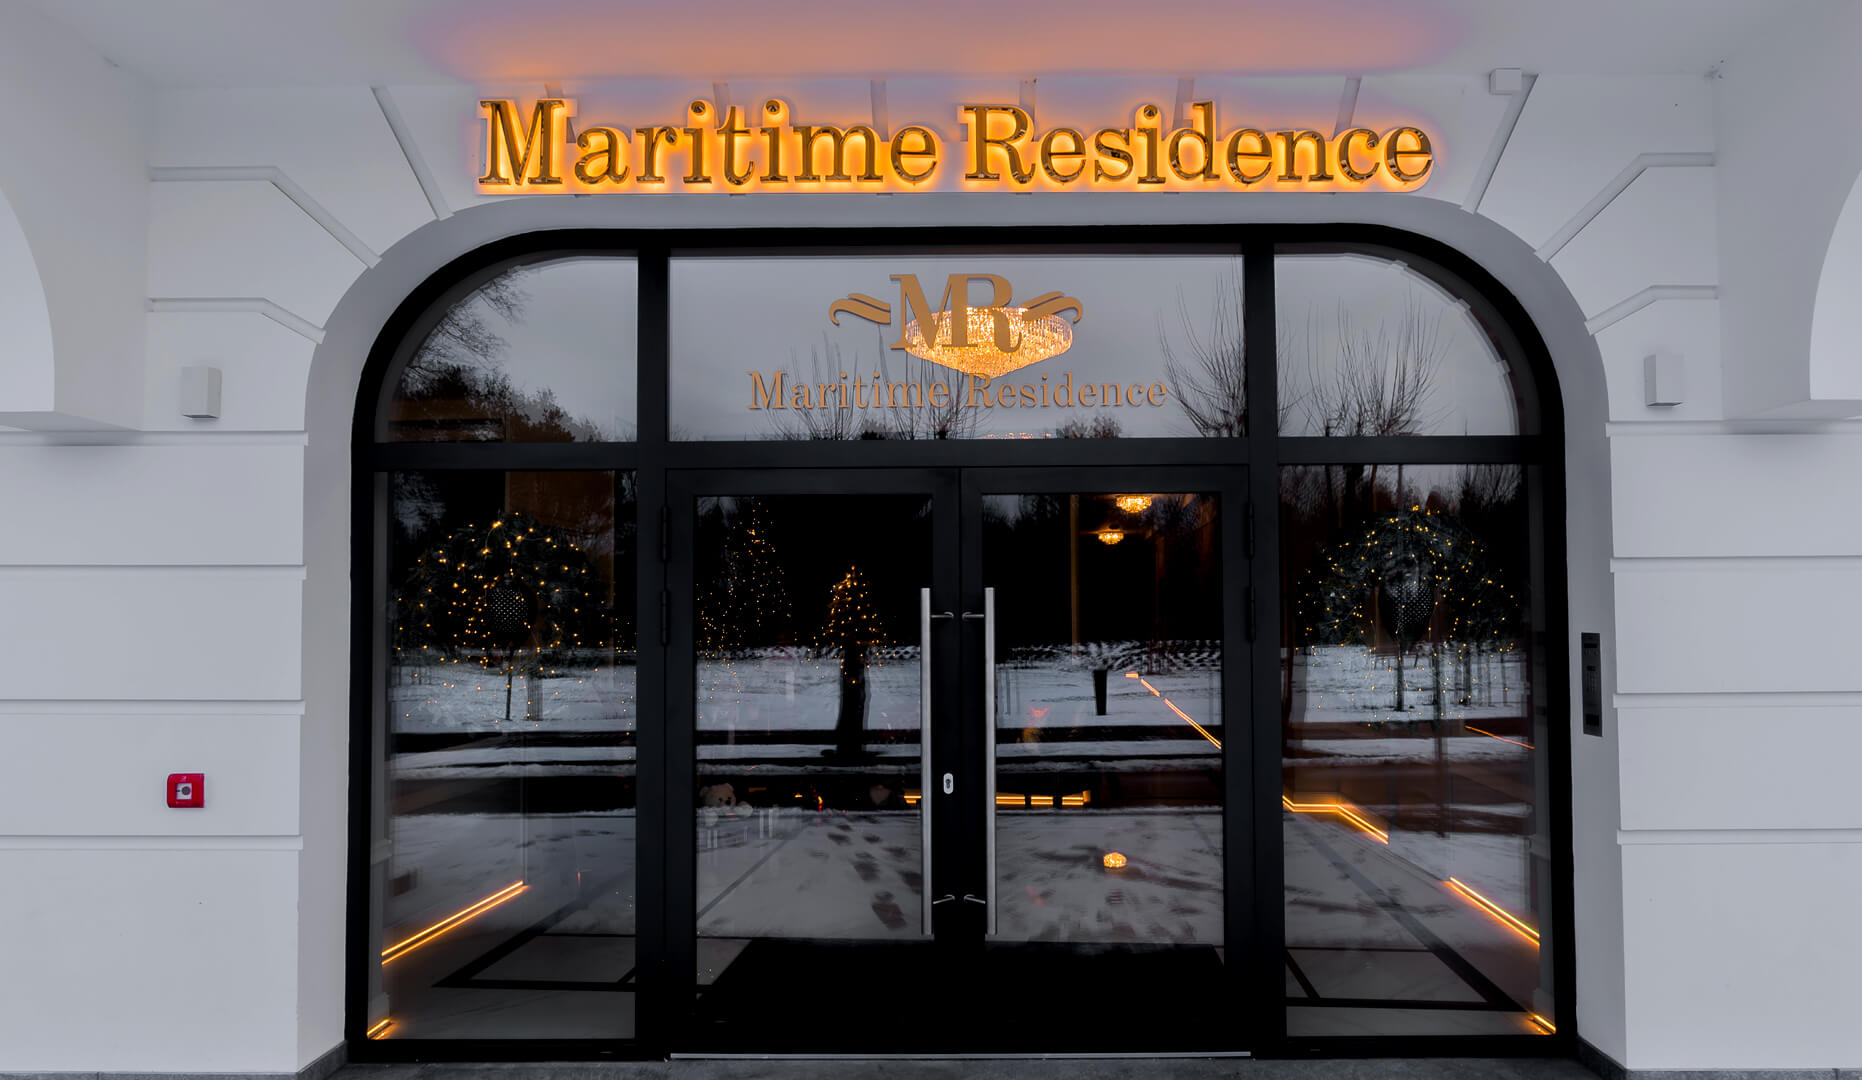 maritime;residence-literature-hallo-efect-literature-with-gold-plate-decorated-gold-luster-plate-rusted